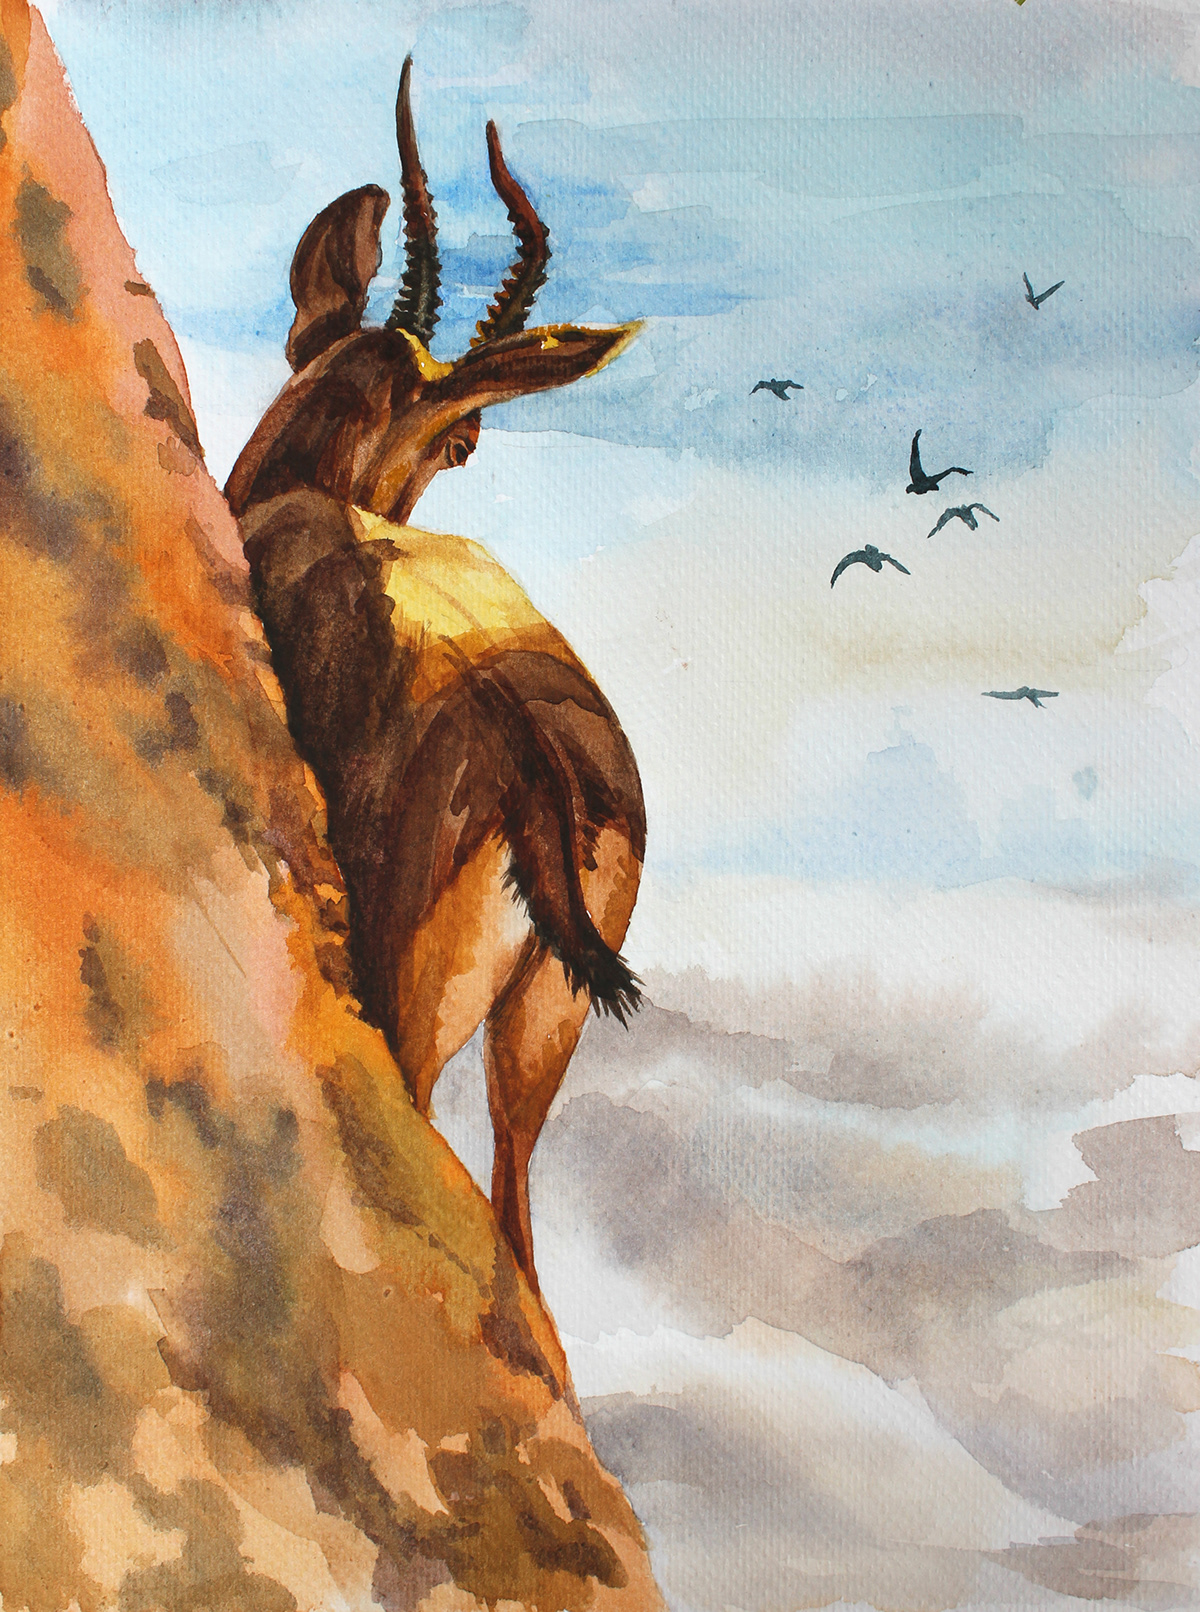 painting   Drawing  Nature animals mountain SKY Travel Landscape goat antelope